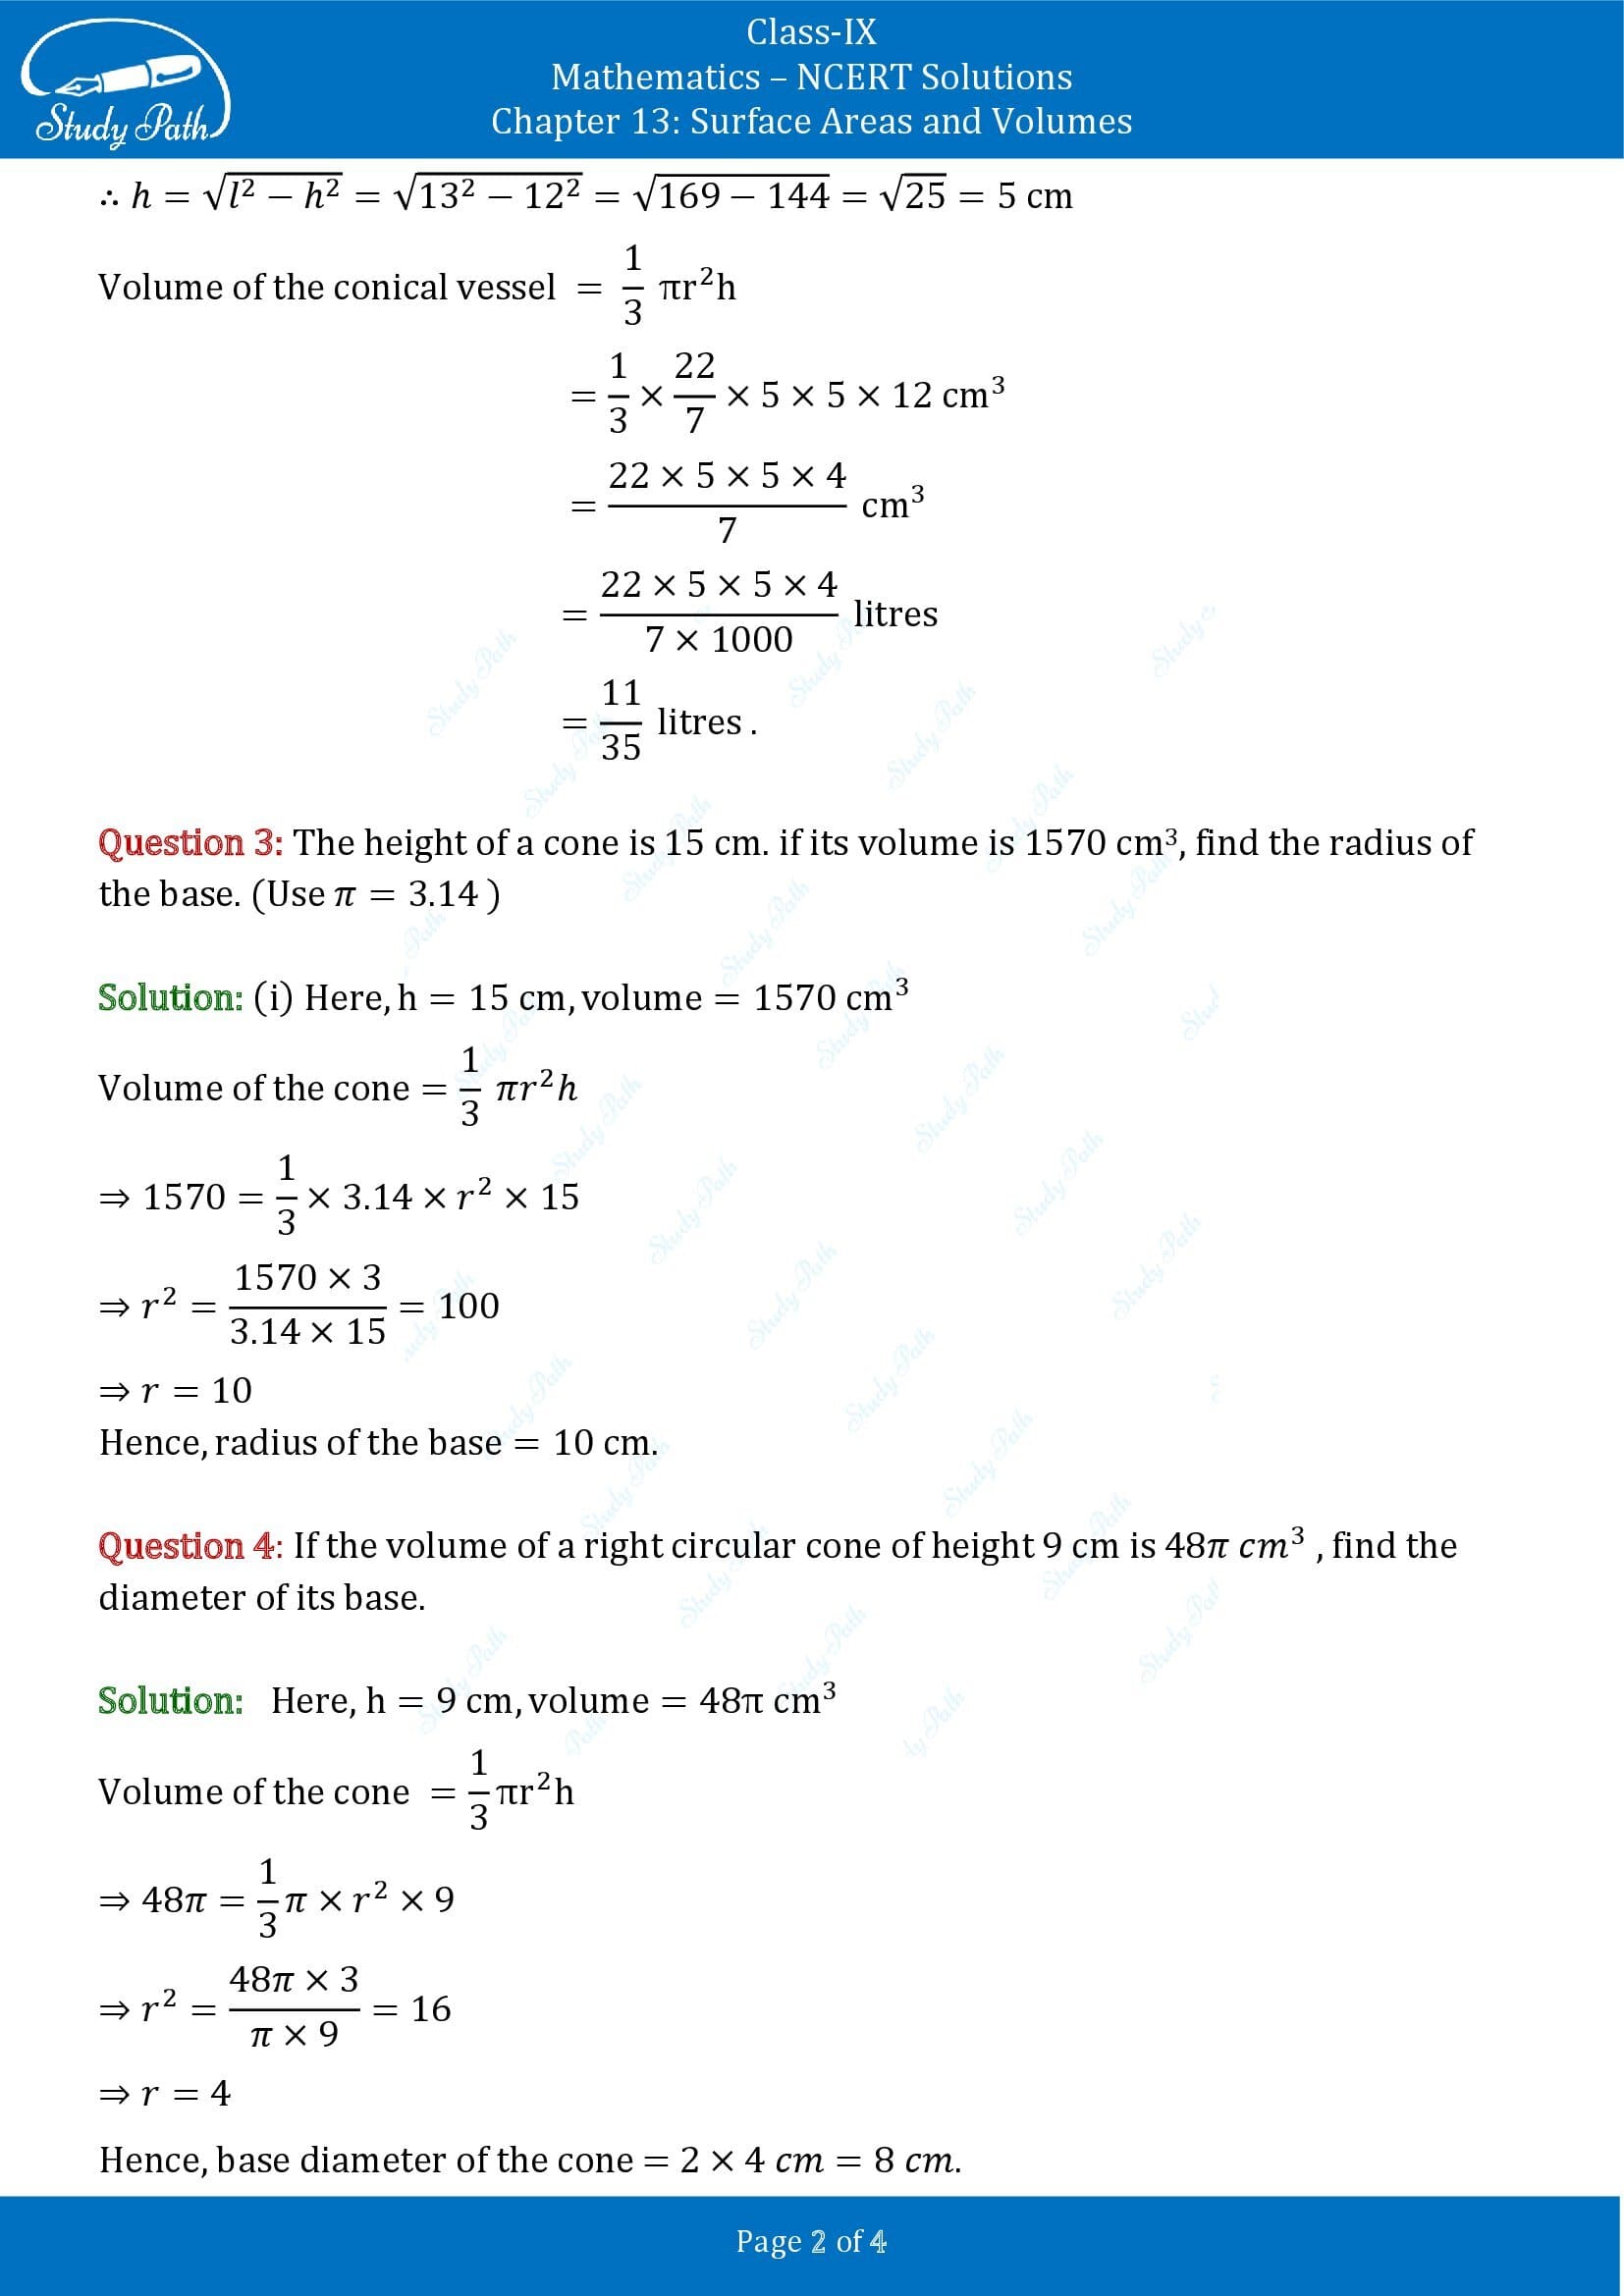 NCERT Solutions for Class 9 Maths Chapter 13 Surface Areas and Volumes Exercise 13.7 00002